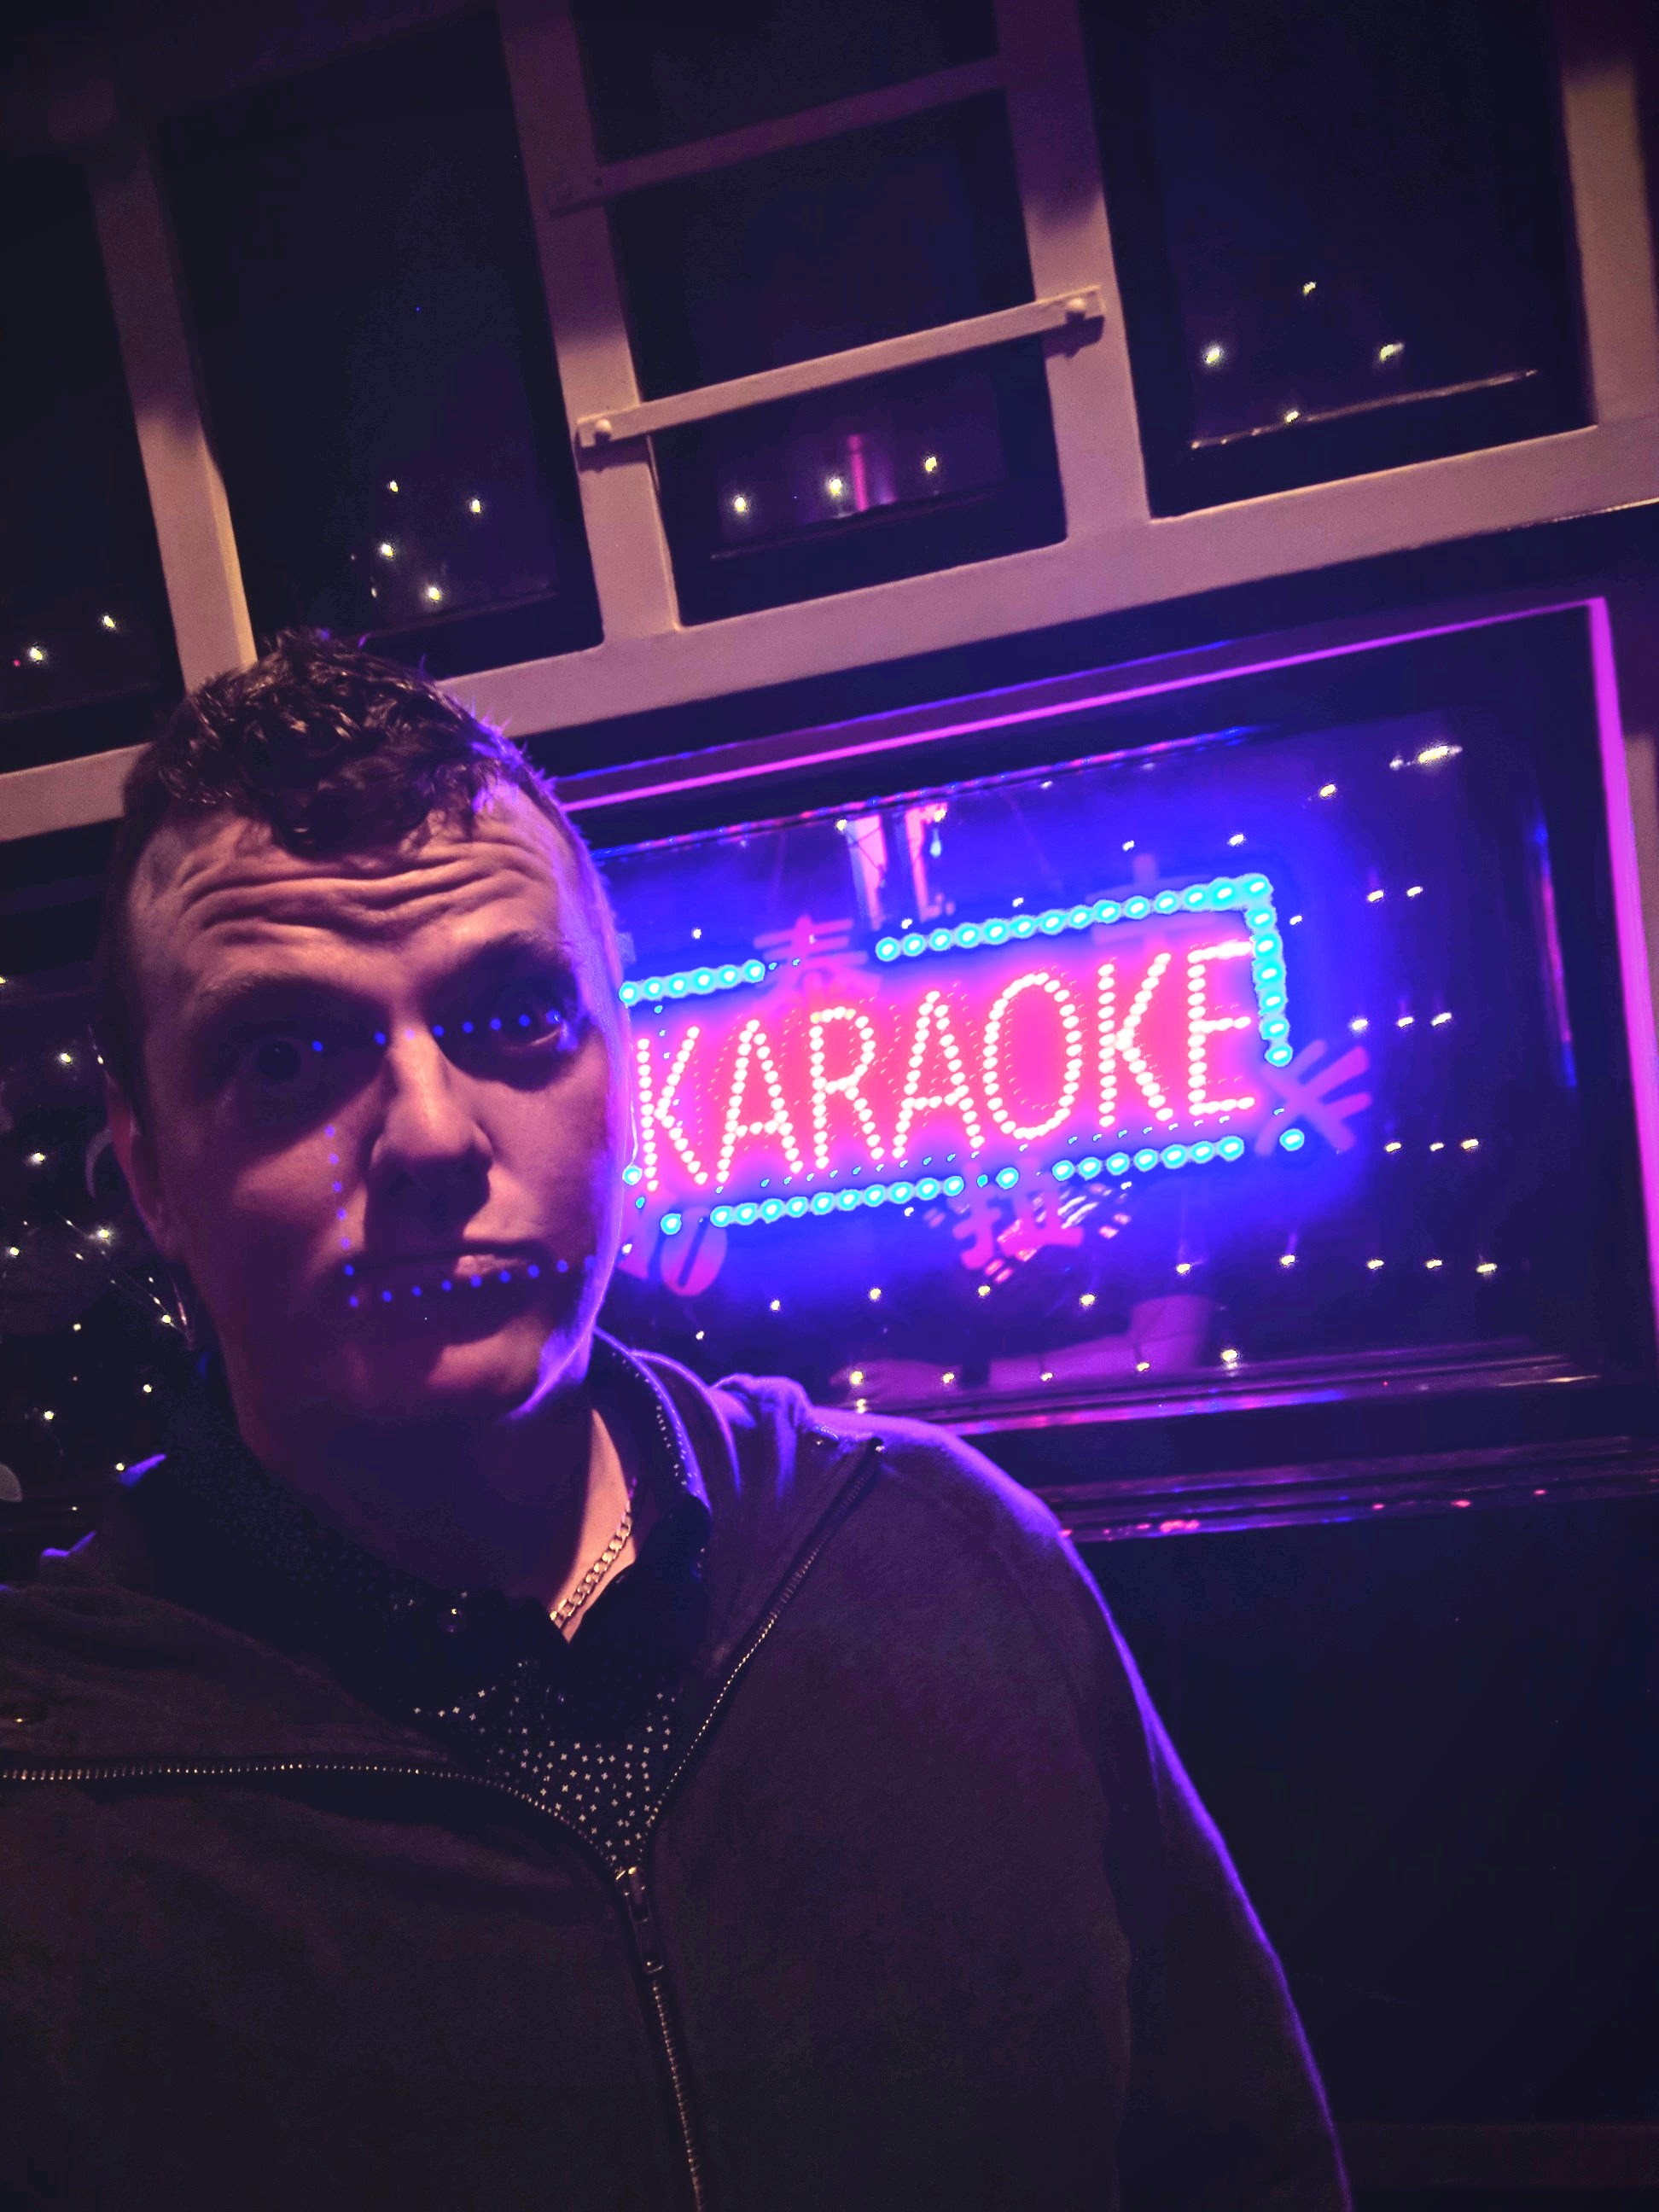 Me in front of the Karaoke sign.